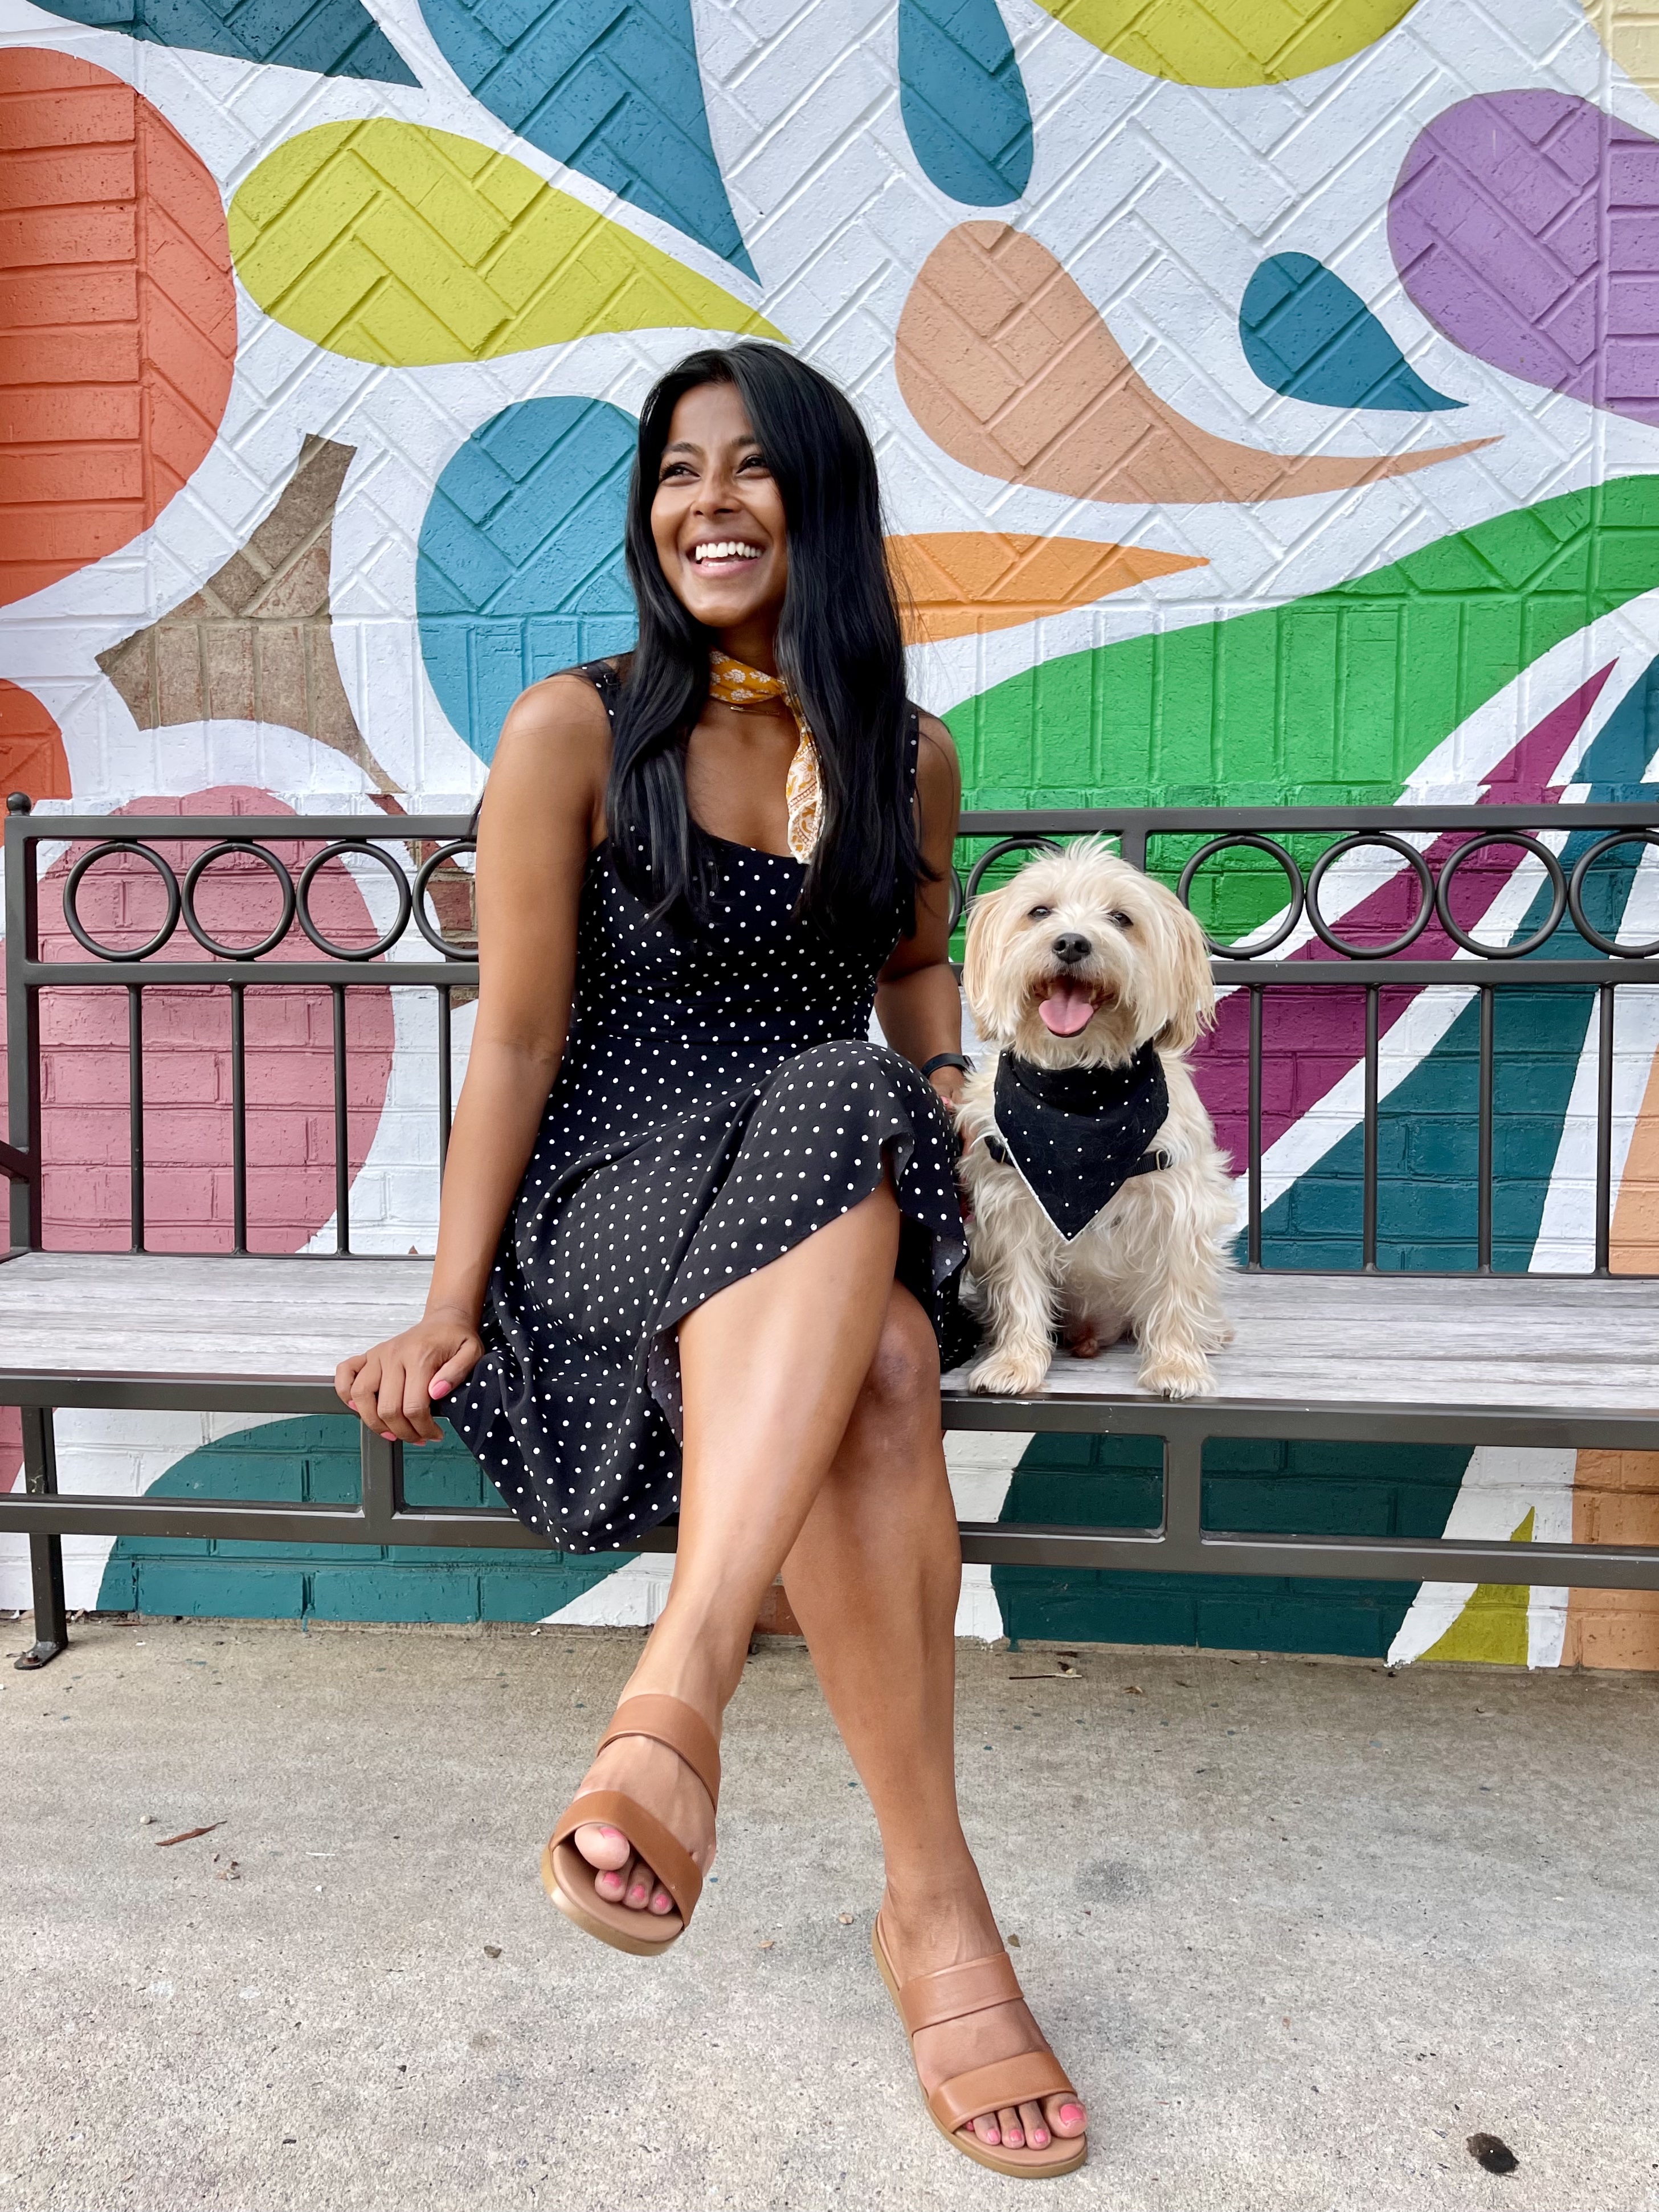 simply-sharon-and-teddy-wearing-matching-black-polka-dot-outfits-in-front-of-a-colorful-mural-1